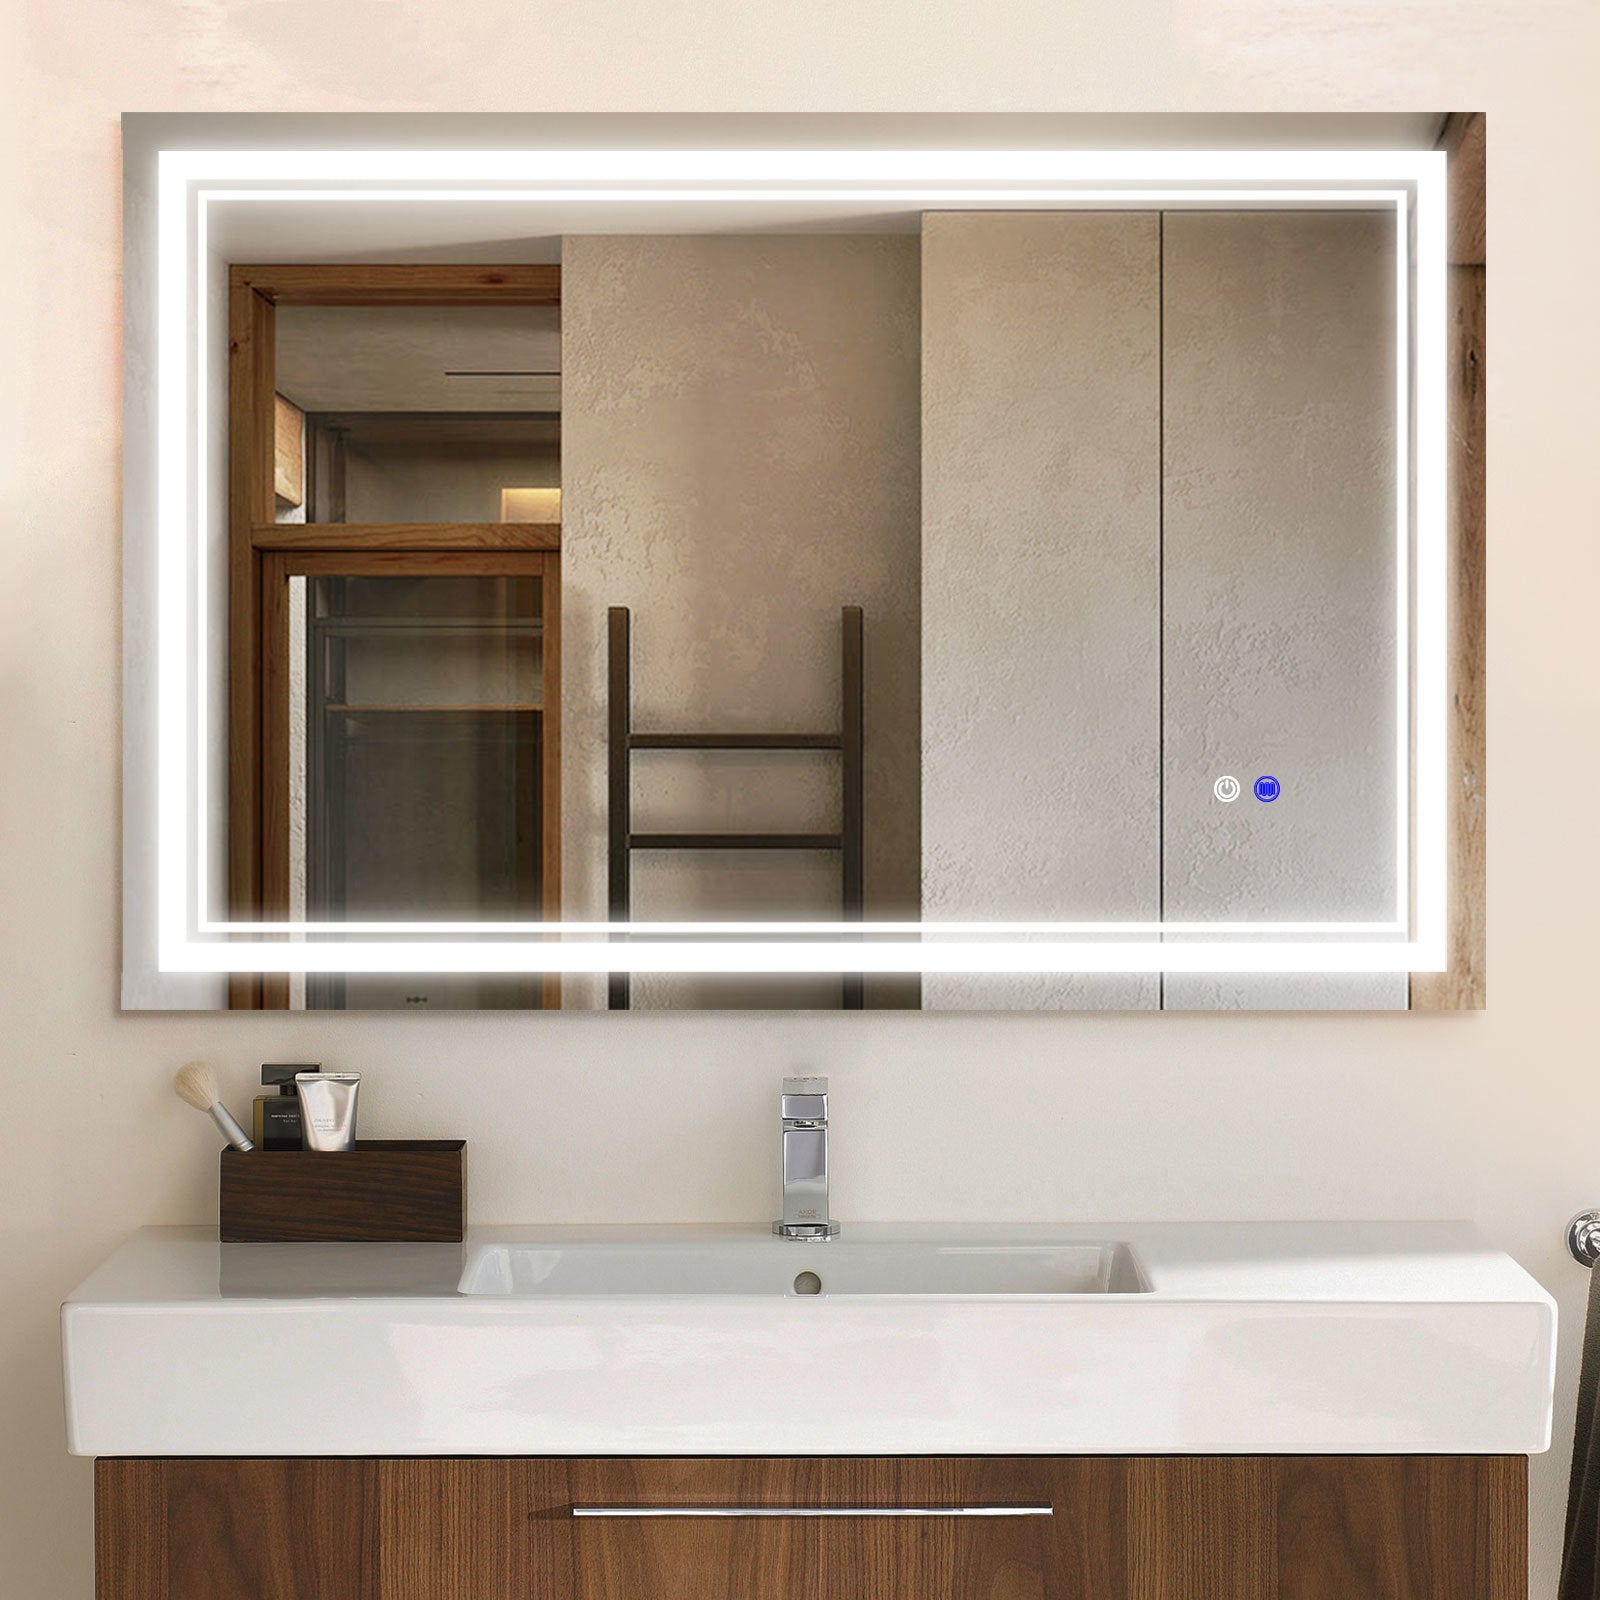 LED Lighted Bathroom Wall Mounted Mirror with High Lumen+Anti-Fog Separately Control+Dimmer Function Home Decor by Design